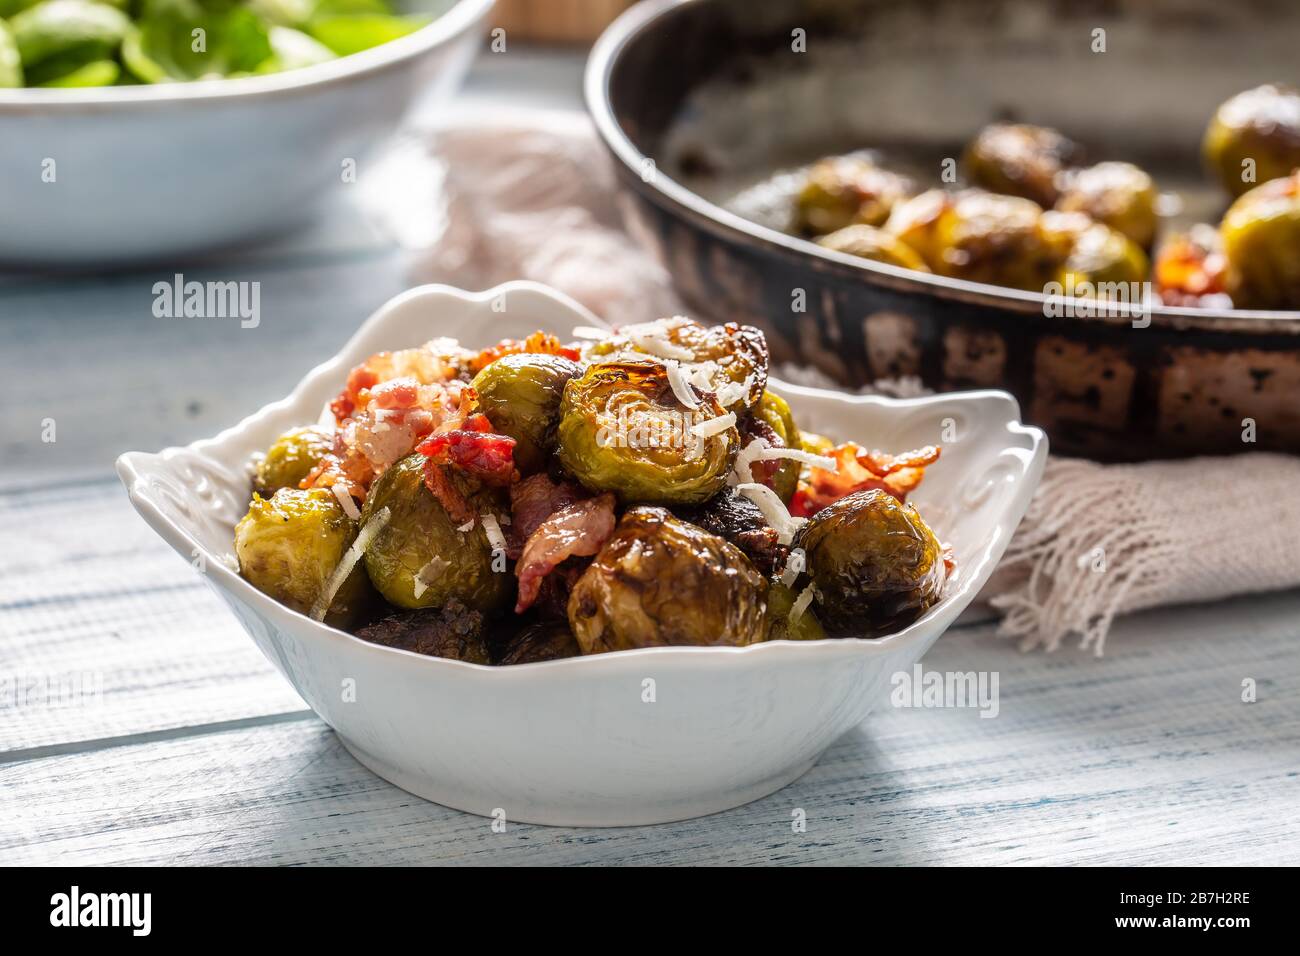 Fried brussels sprout with roasted bacon and parmesan cheese Stock Photo